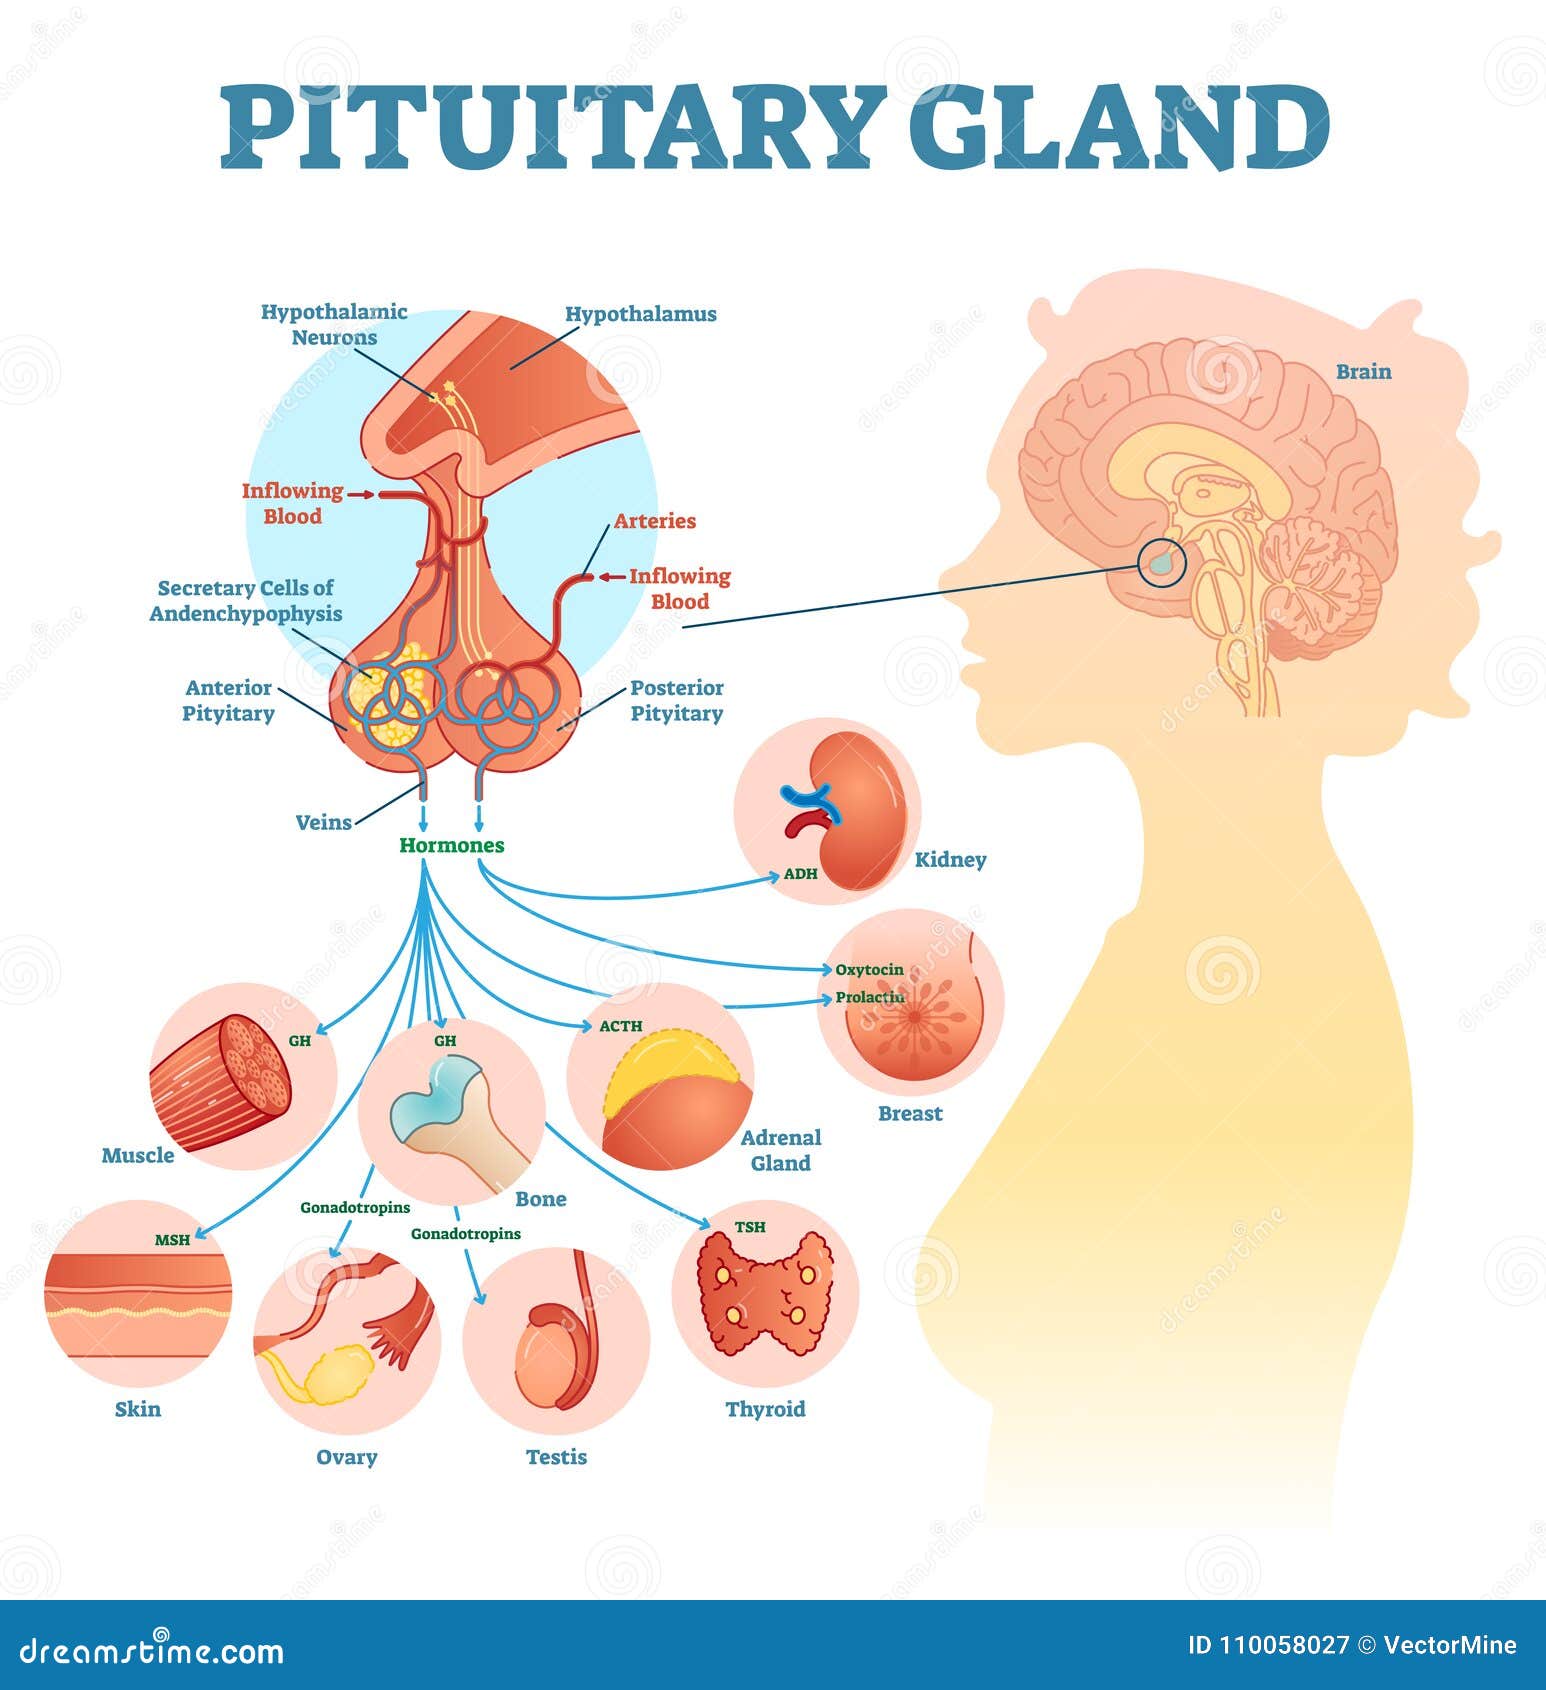 pituitary gland anatomical   diagram, educational medical scheme